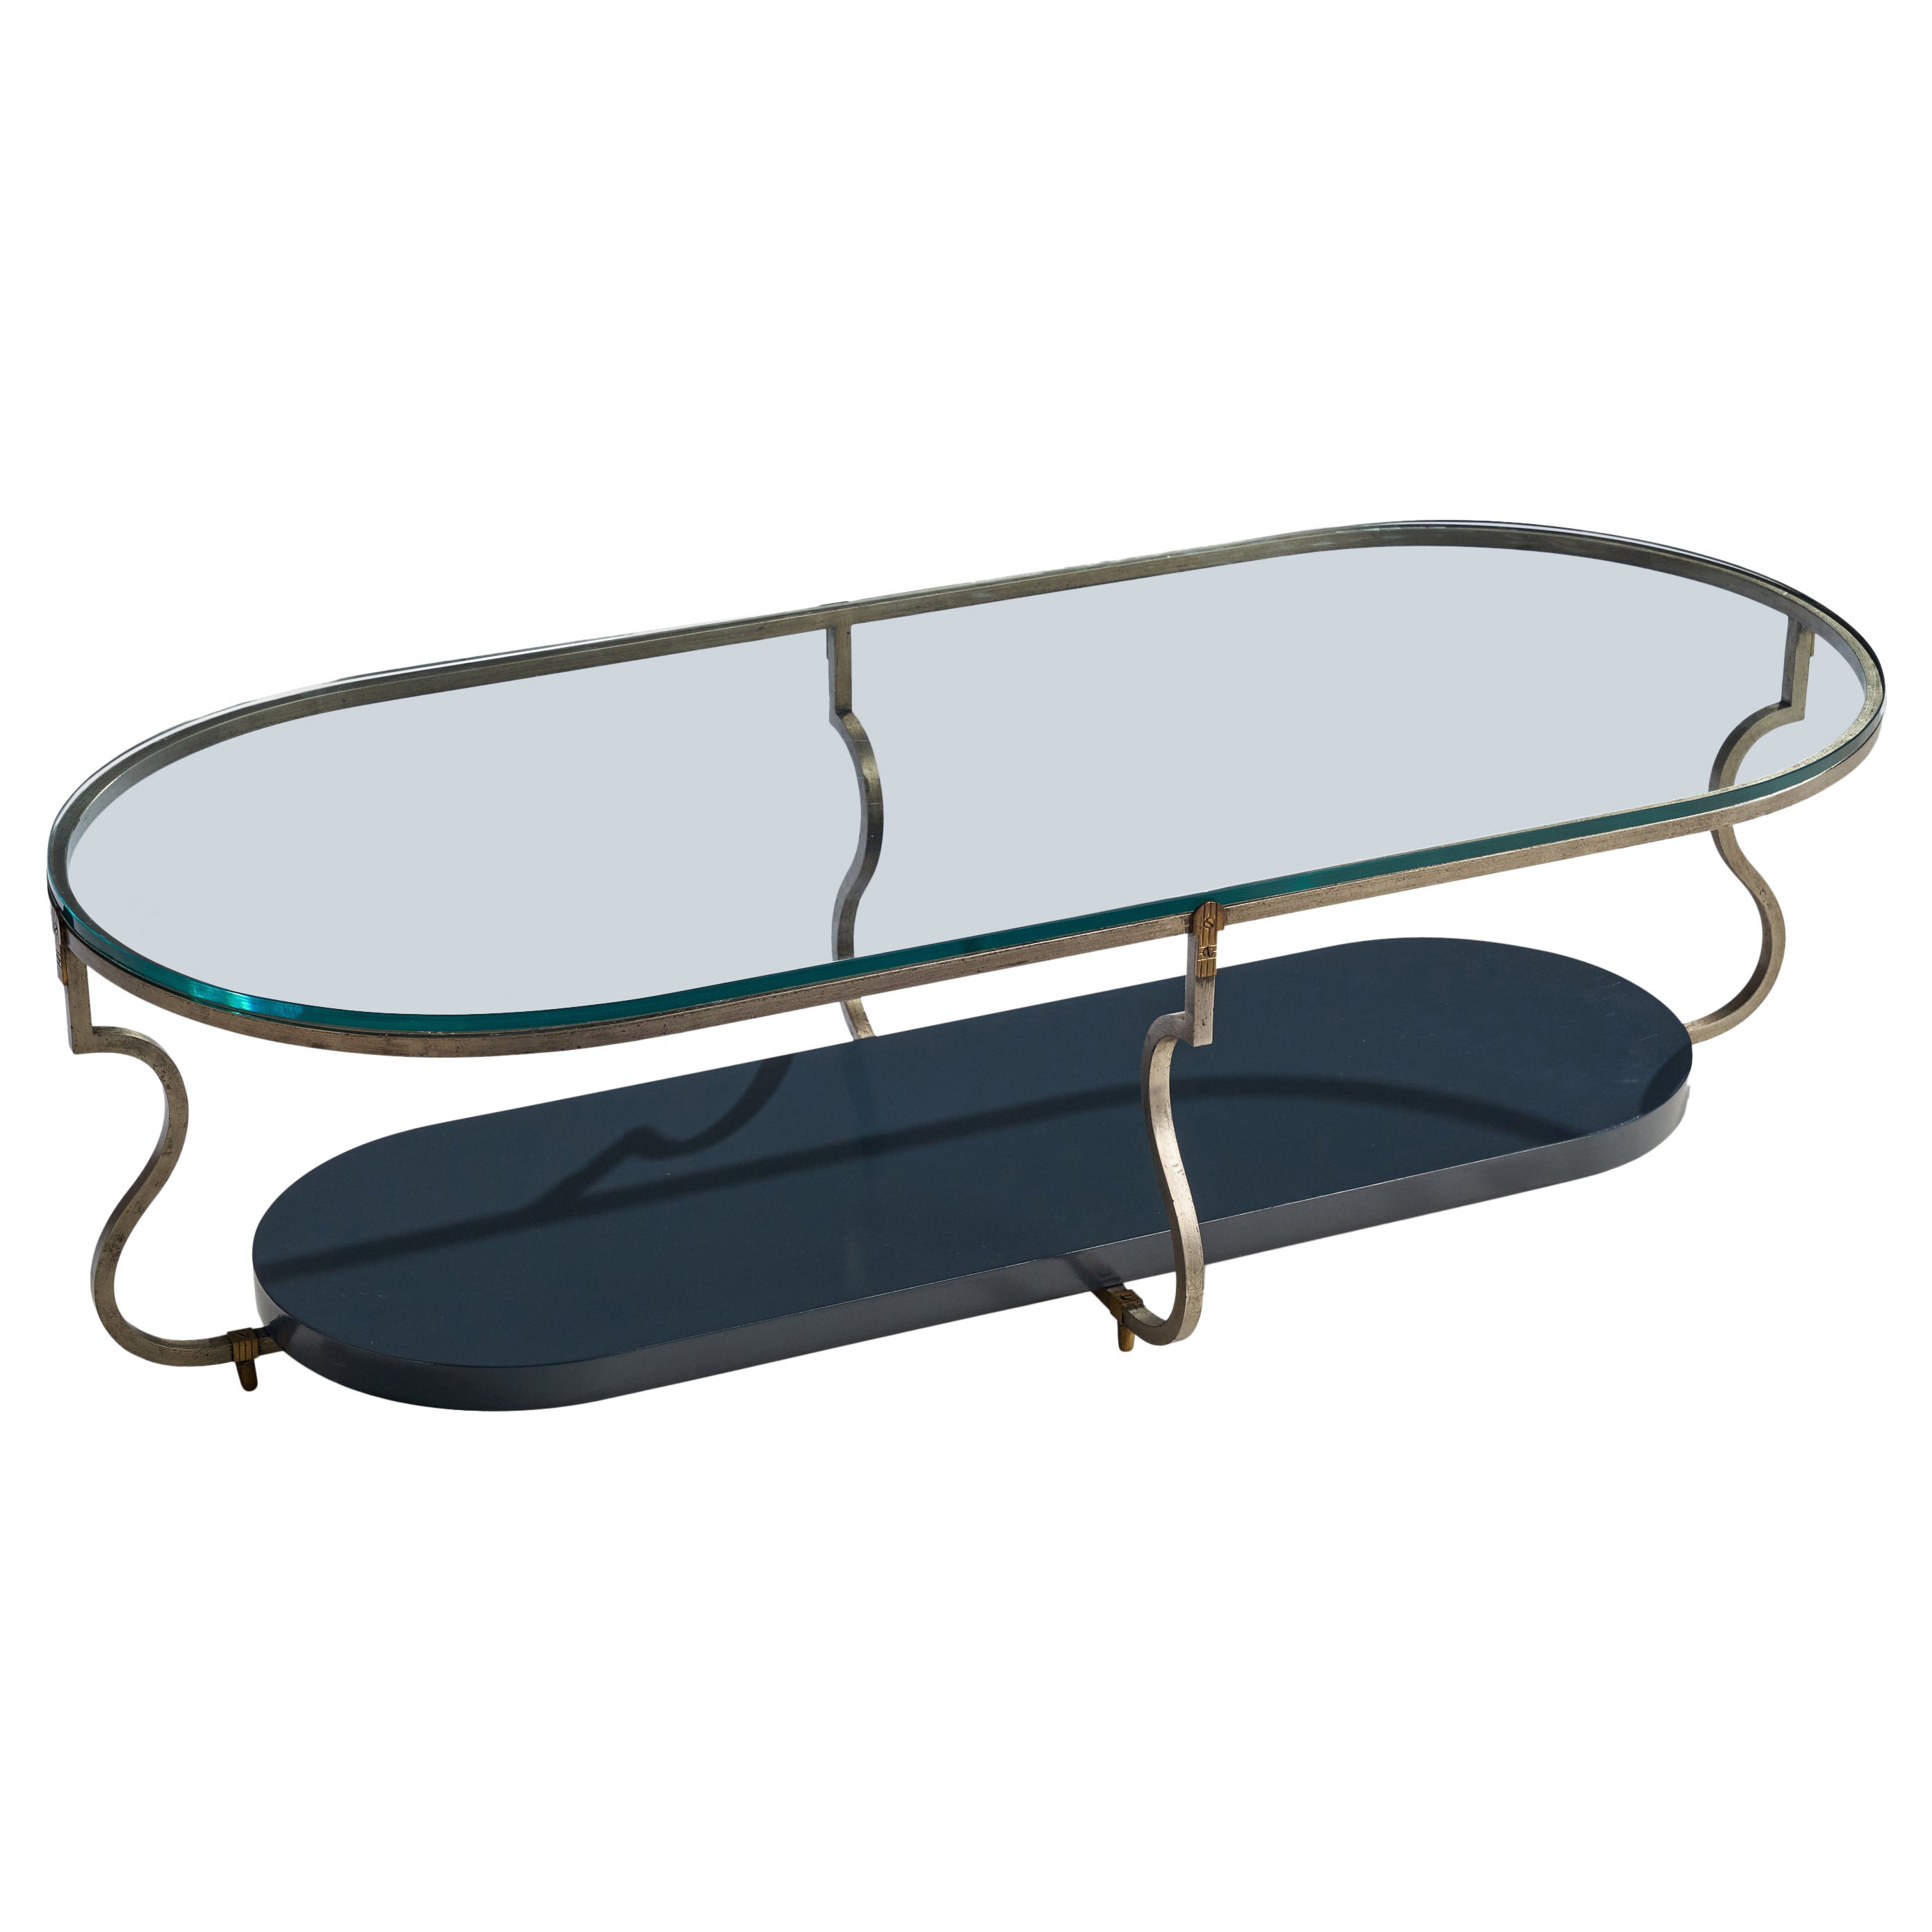 Tommi Parzinger, Coffee Table, Steel, Glass, Wood, USA, 1950s